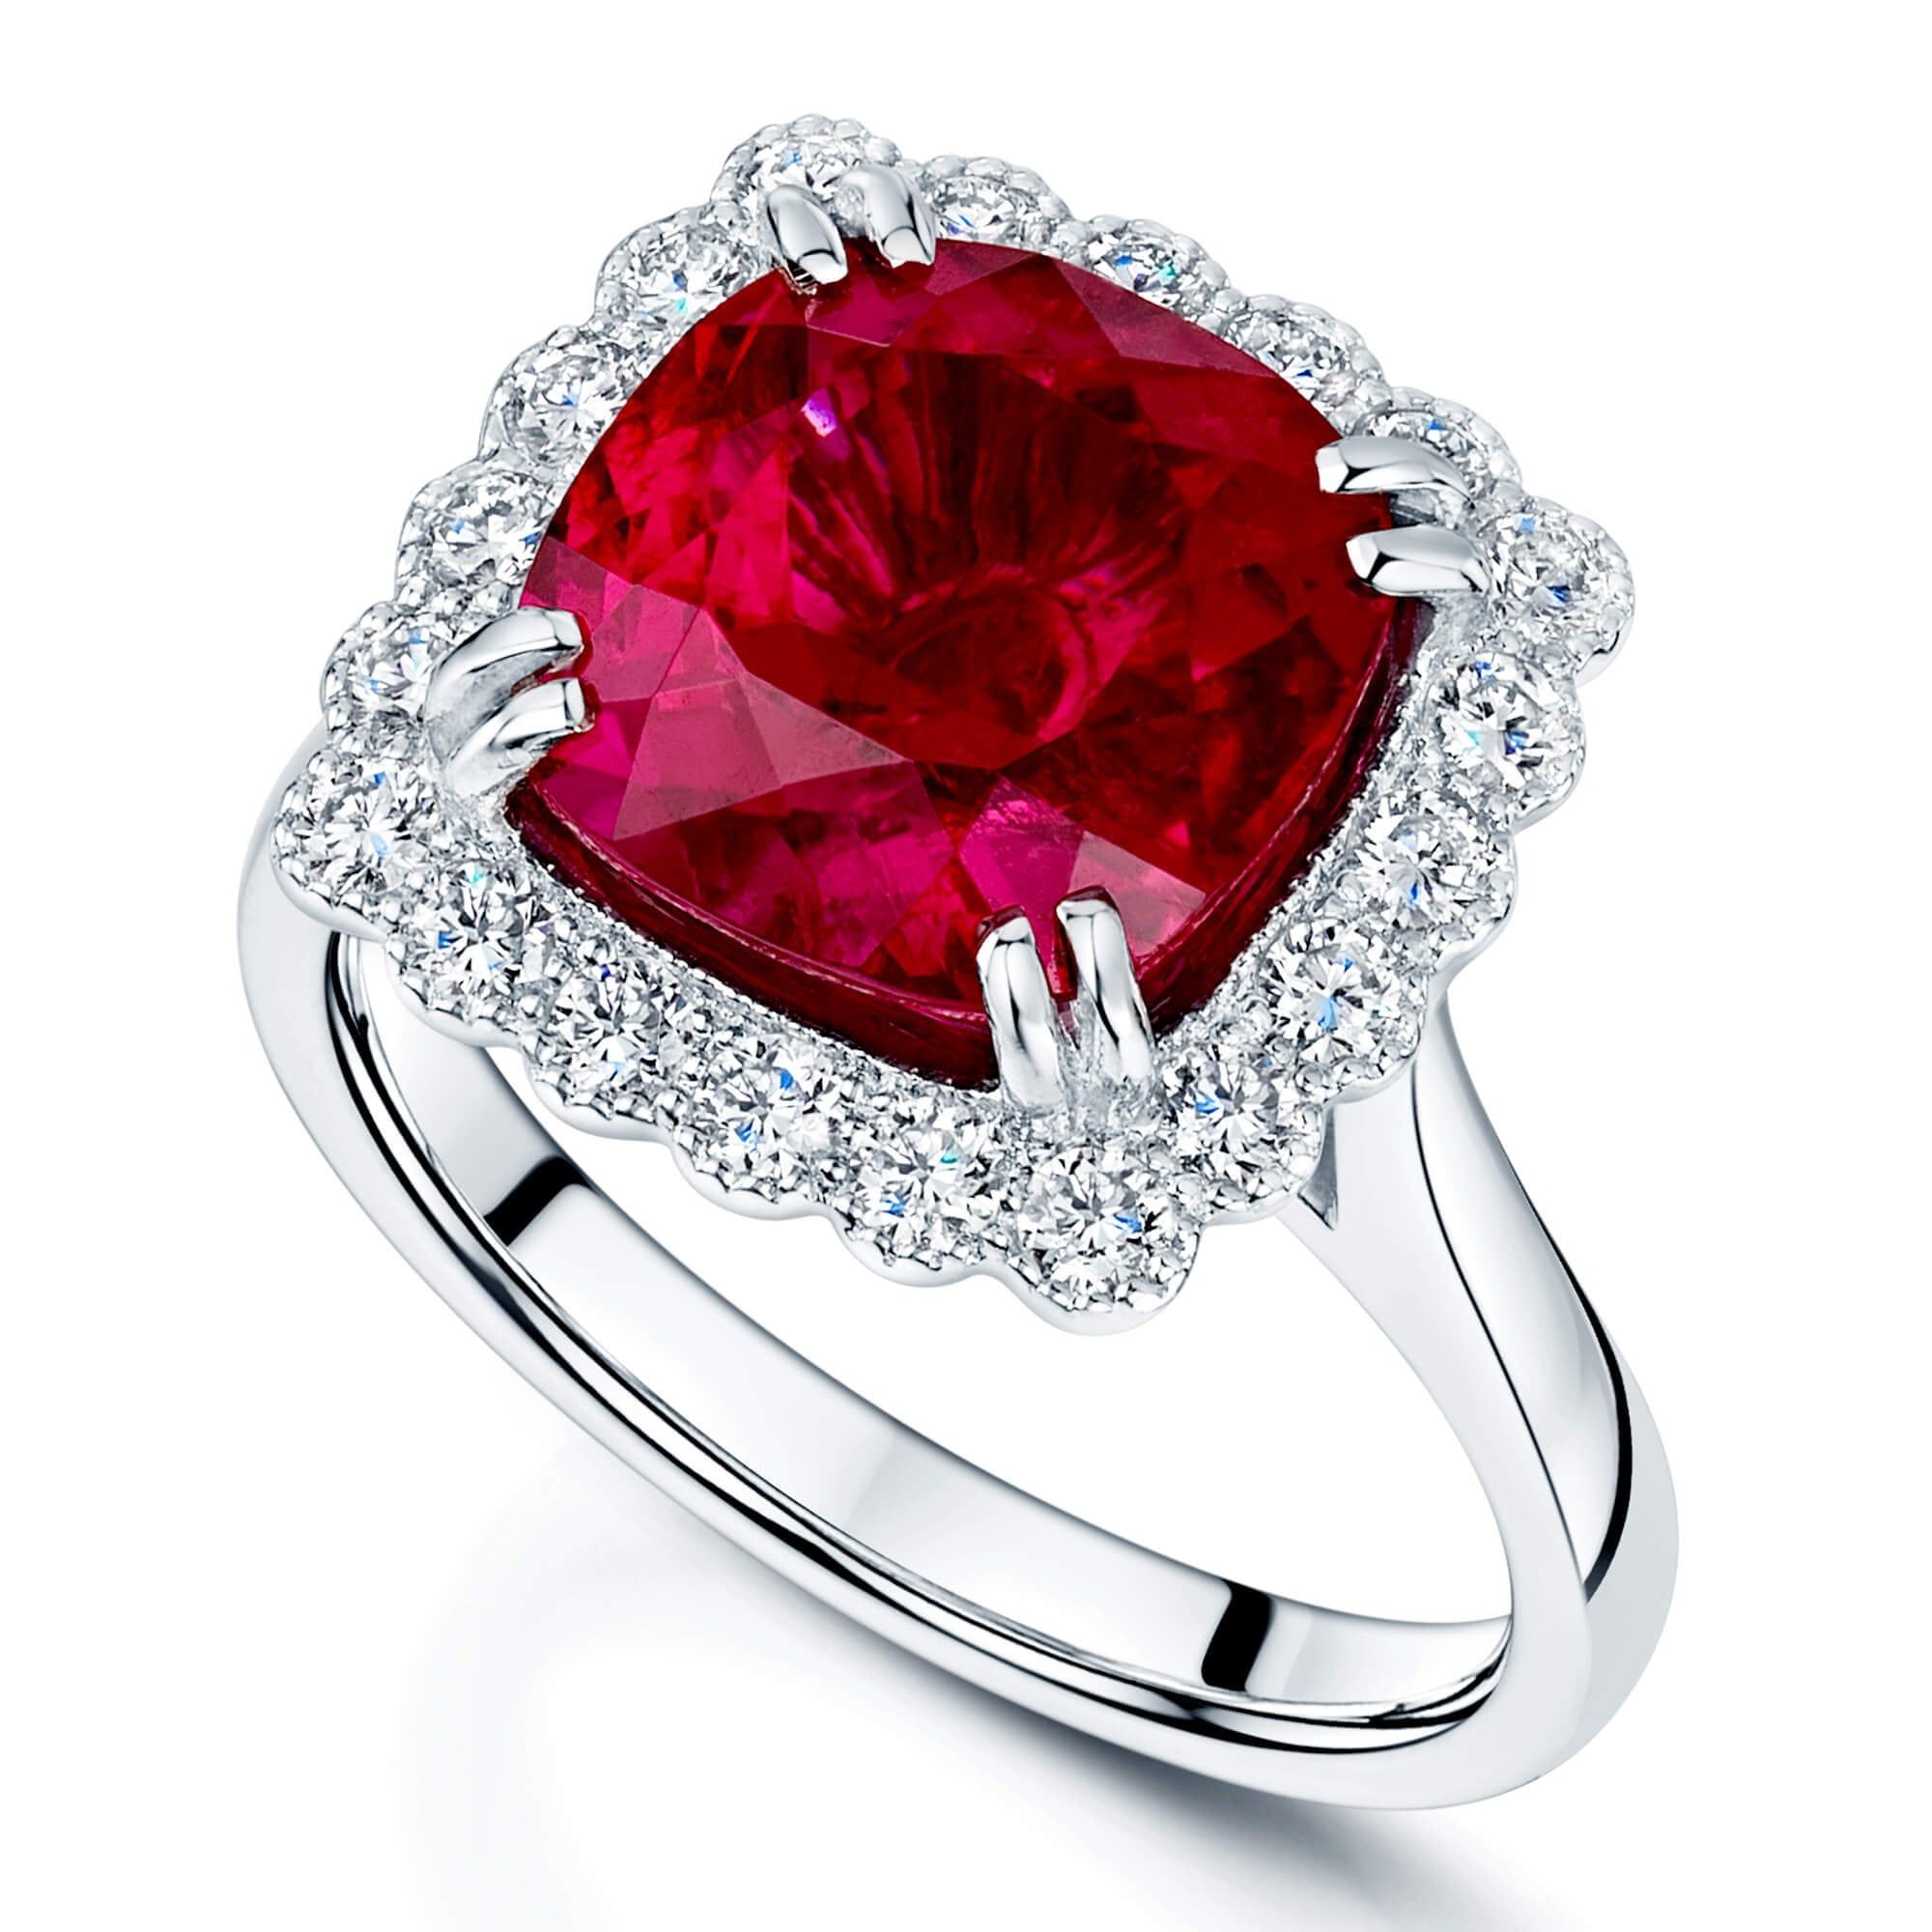 Platinum Rubellite Ring In A Diamond Halo Setting Ring With Regard To Rubellite And Diamond Halo Rings (View 16 of 25)